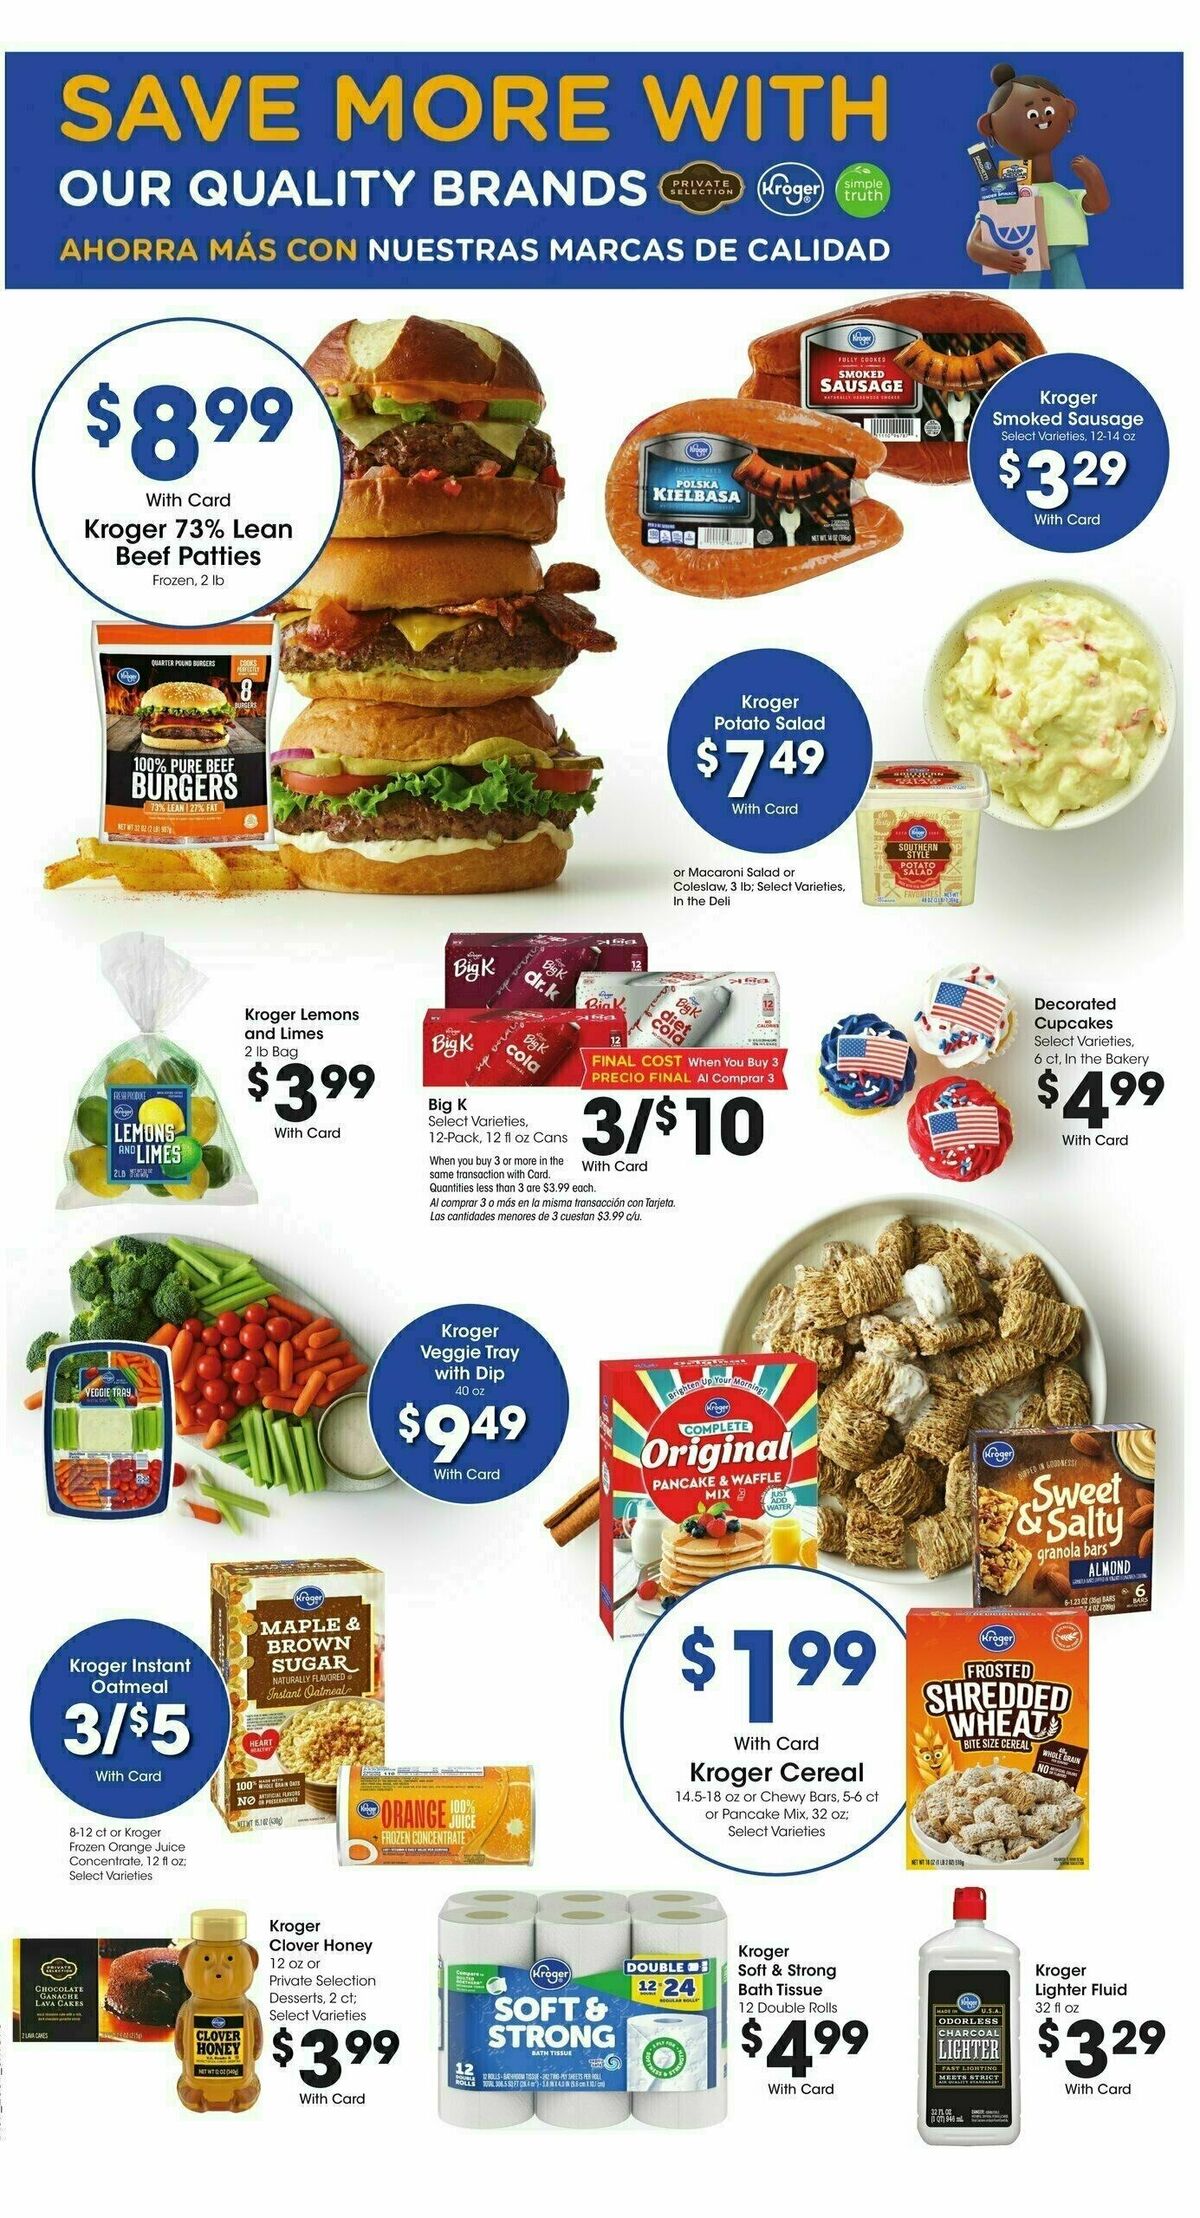 Smith's Weekly Ad from August 30